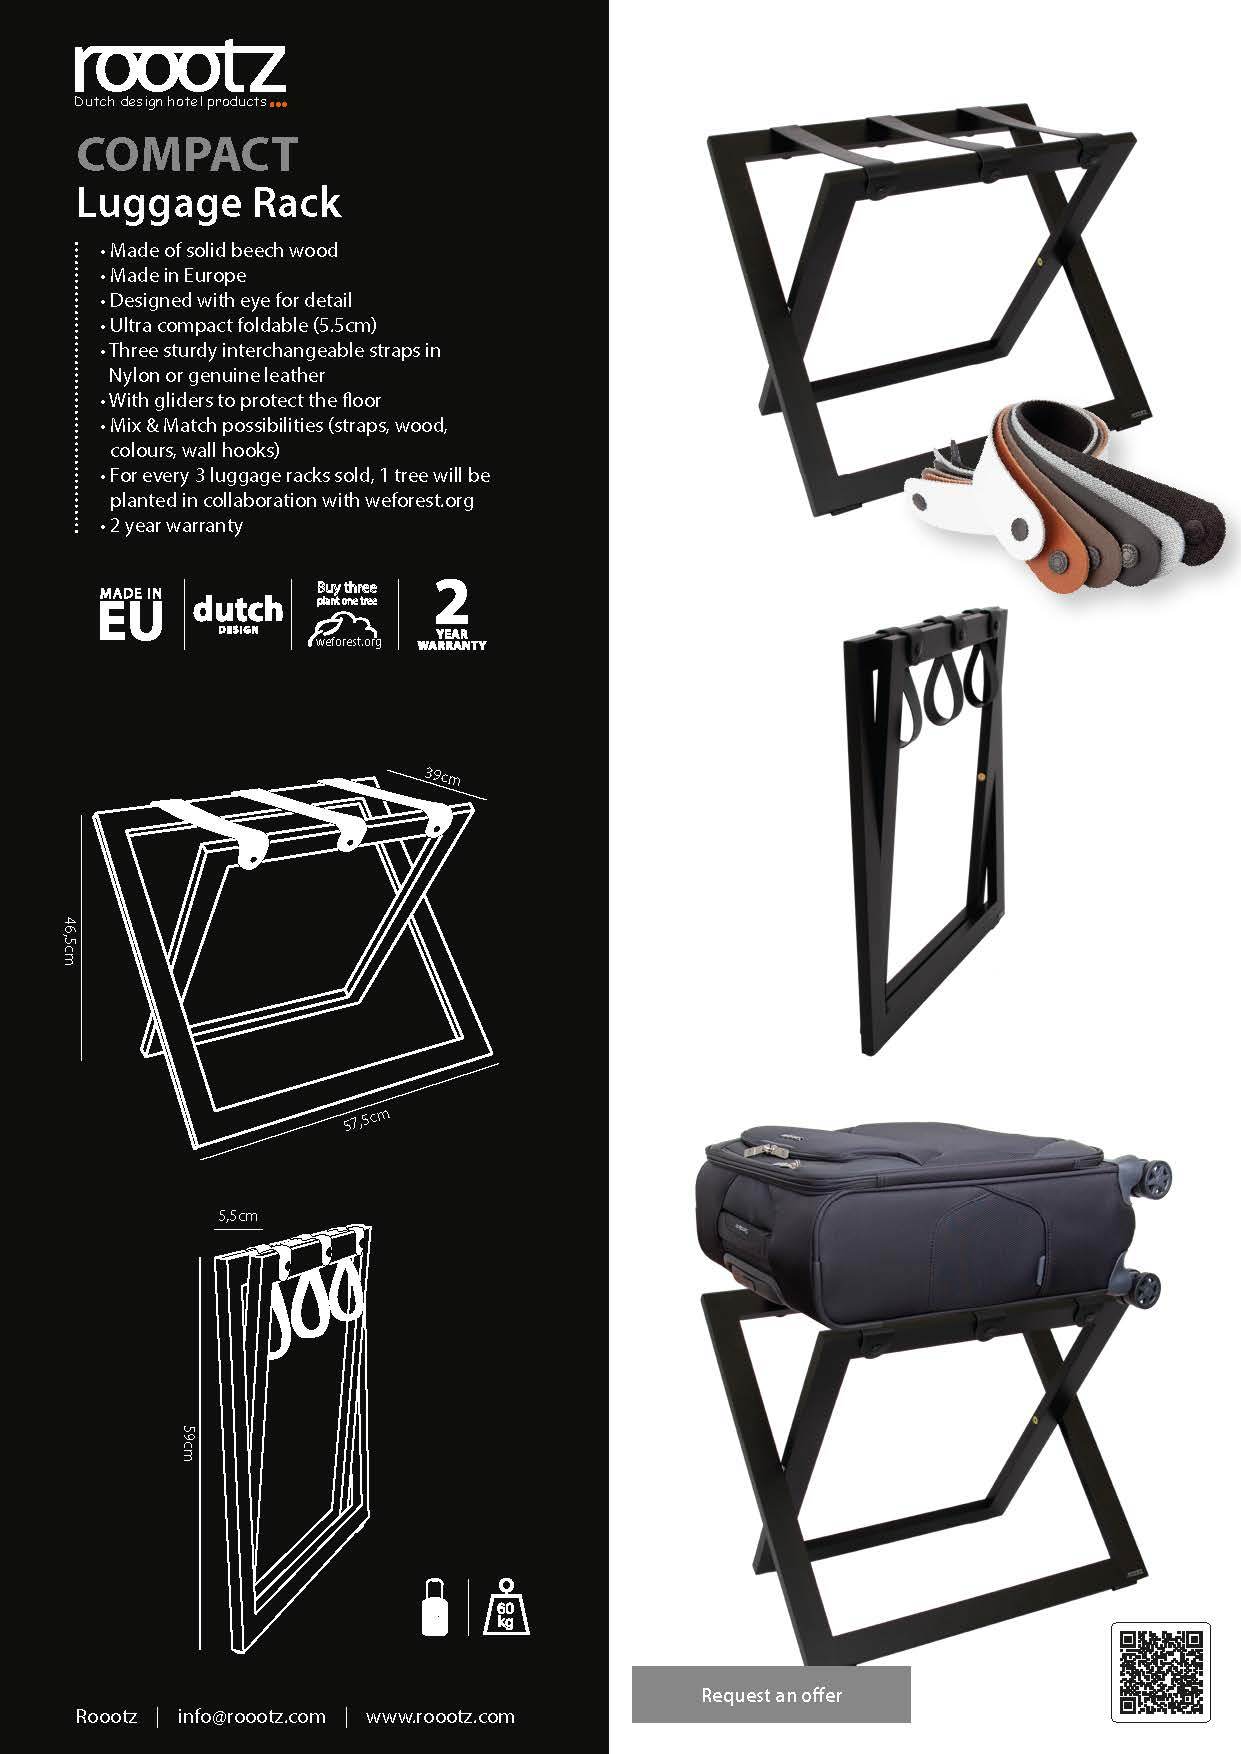 Luggage rack wood with various straps in leather and nylon